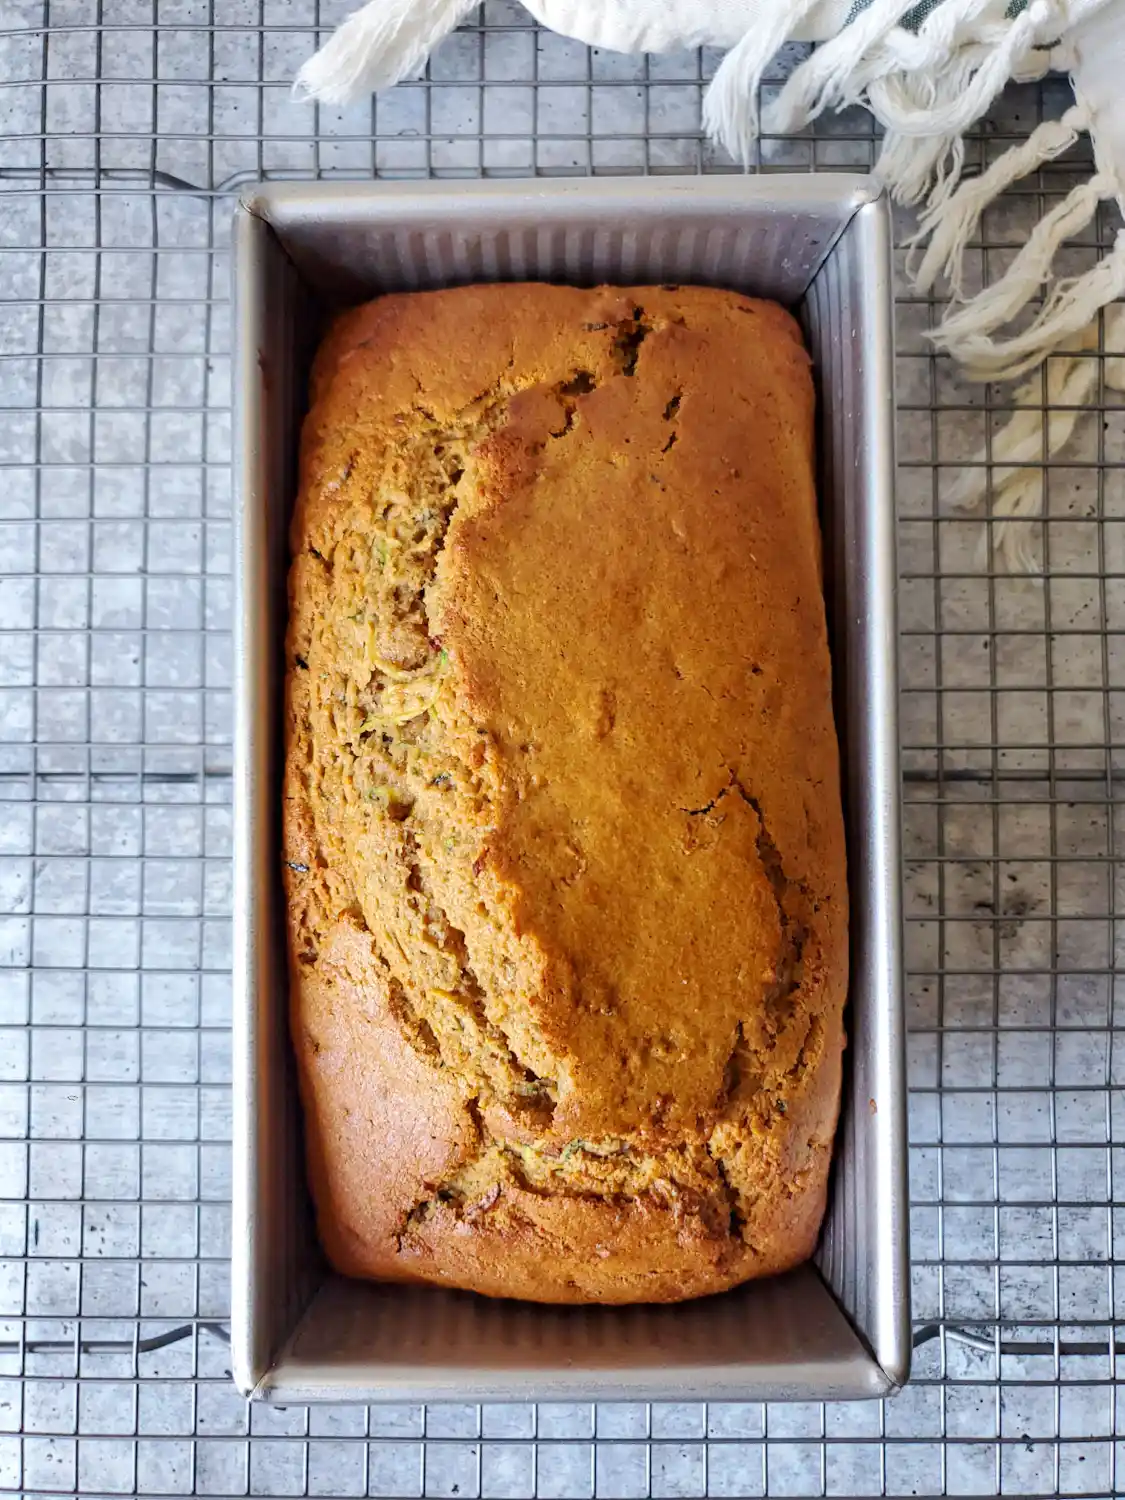 A birds eye view of a loaf of sourdough zucchini bread that has just been pulled from the oven, still sitting inside of the baking pan. The top is light brown with a nice open ear and crumb on the top. 